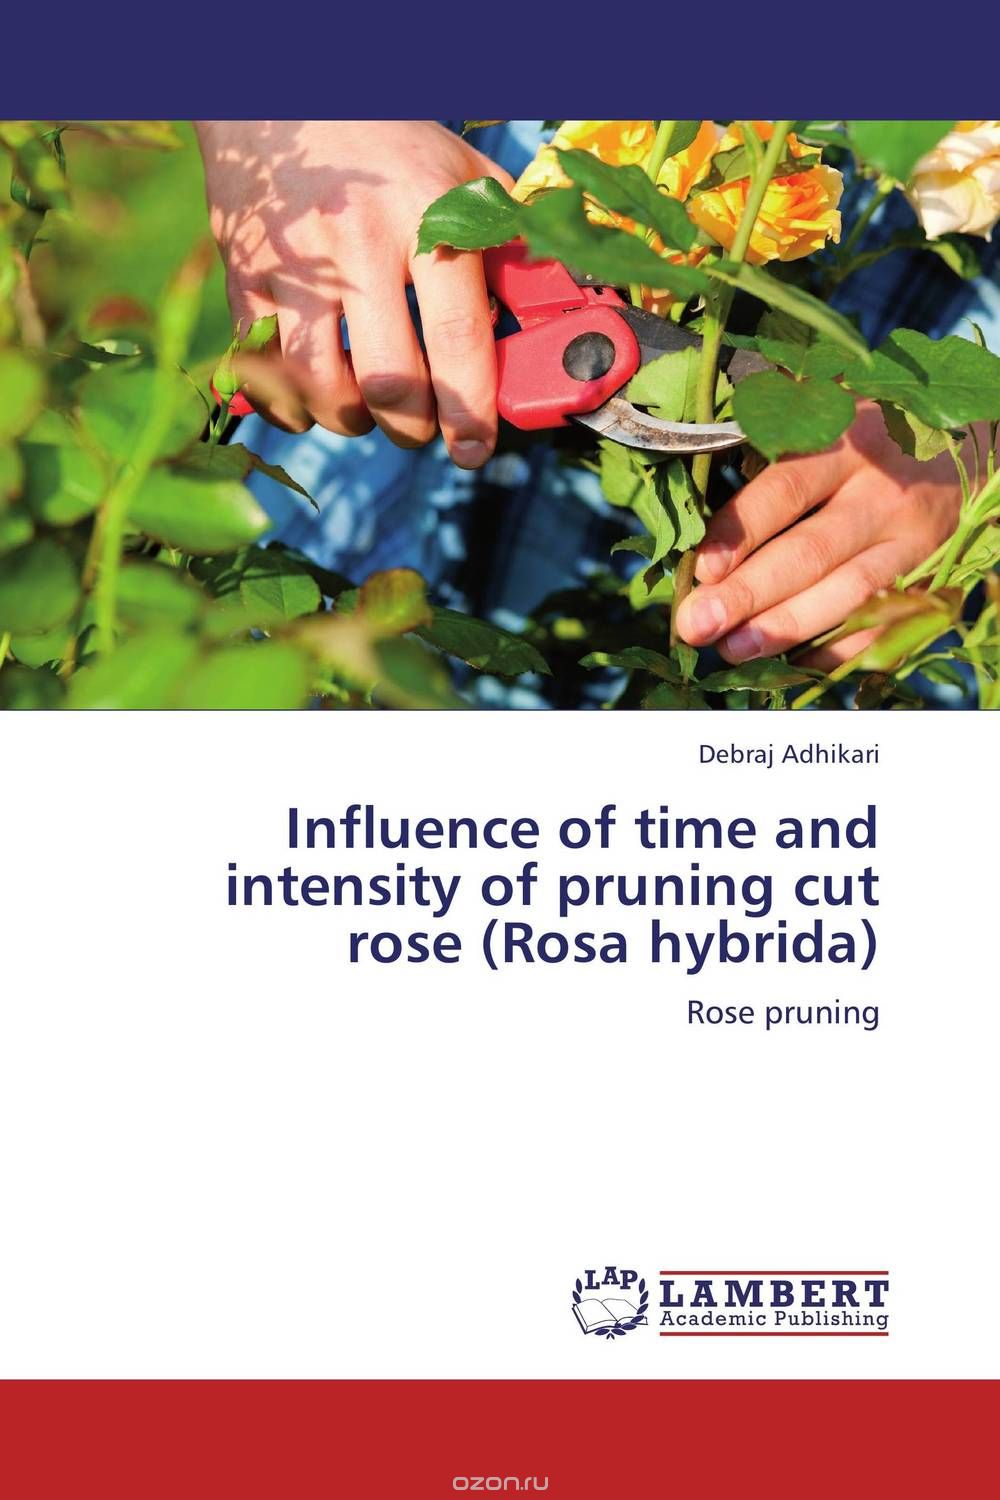 Influence of time and intensity of pruning cut rose  (Rosa hybrida)